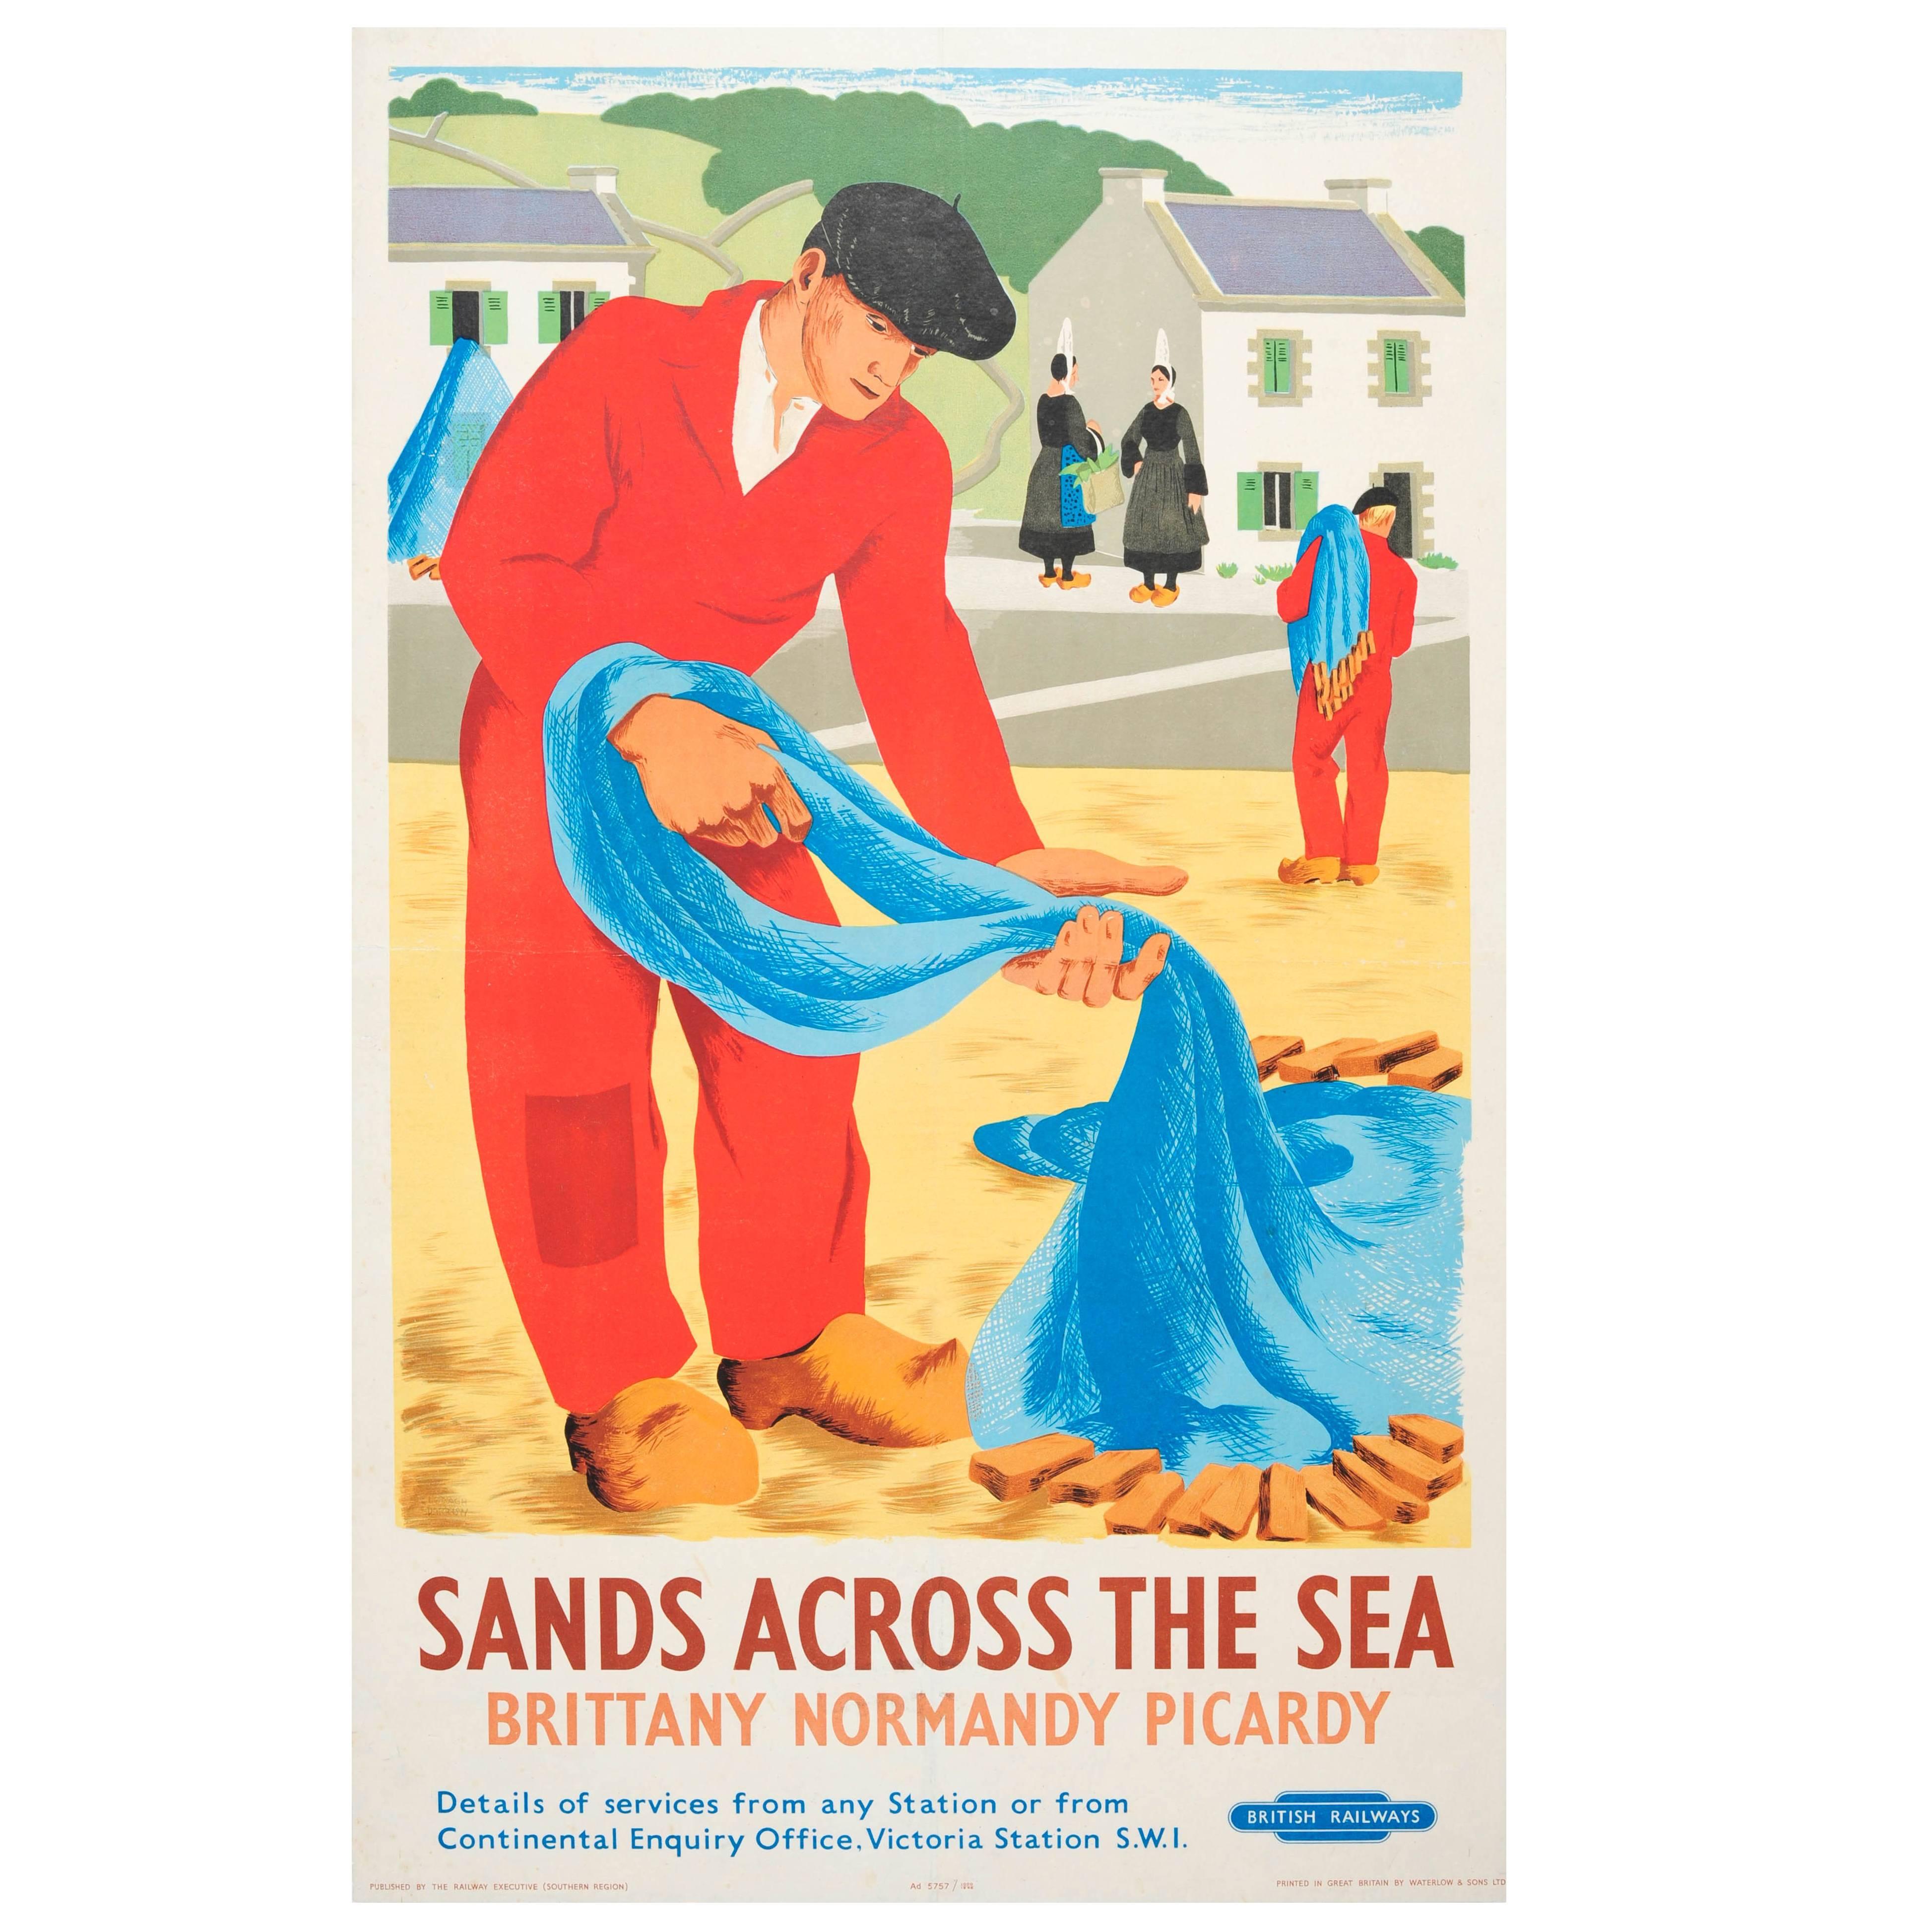 Original 1948 British Railways Poster, Sands across the Sea, Brittany Normandy